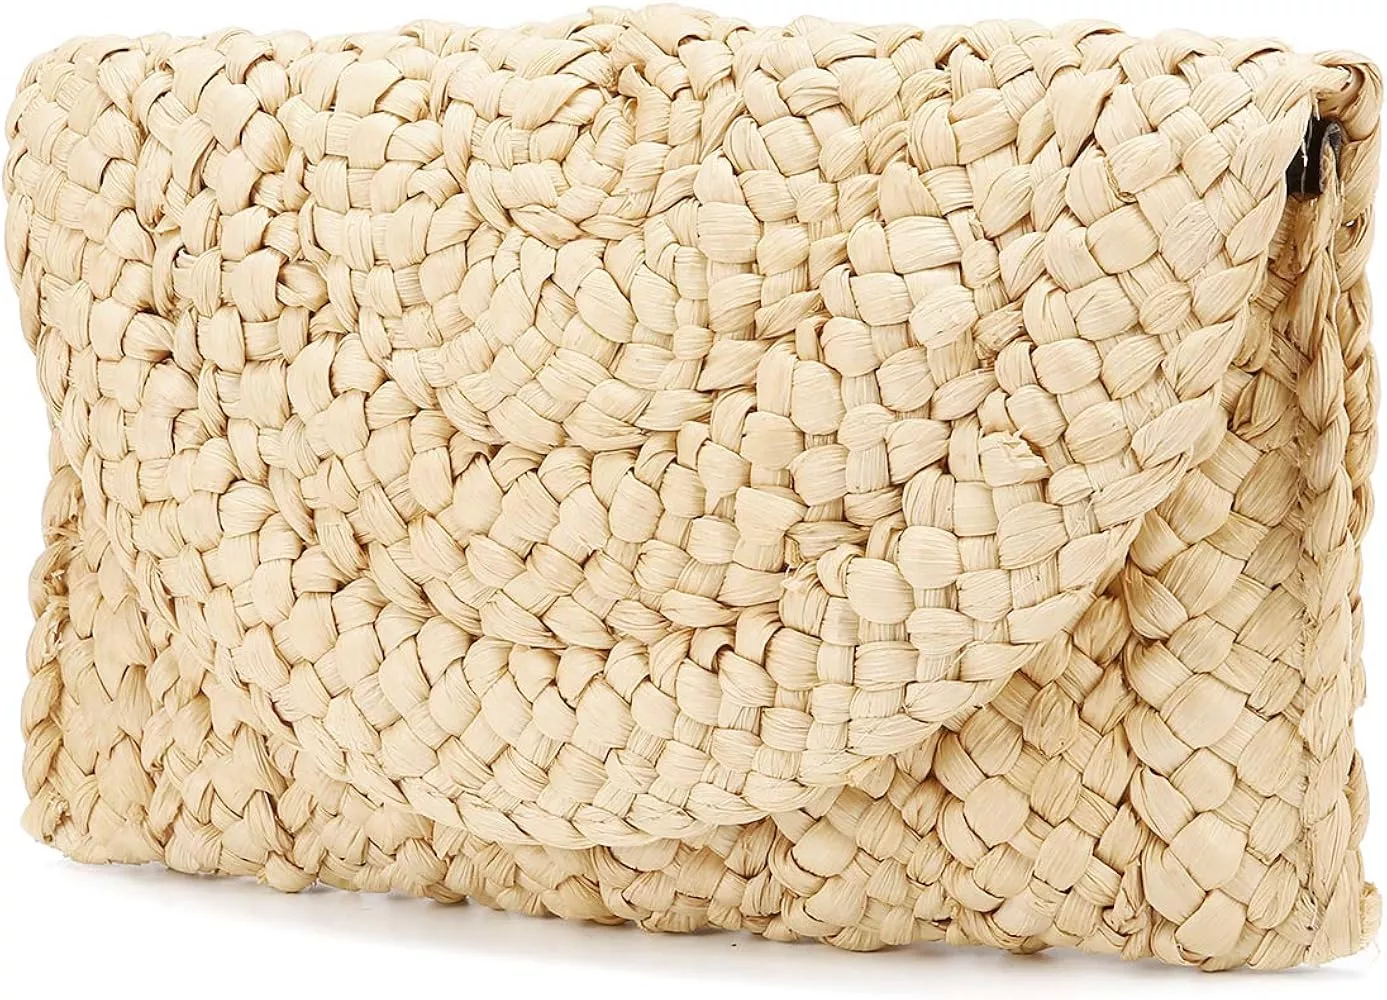 Handwoven Tan Rattan Envelope Clutch Bag from Bali - Casual Afternoon